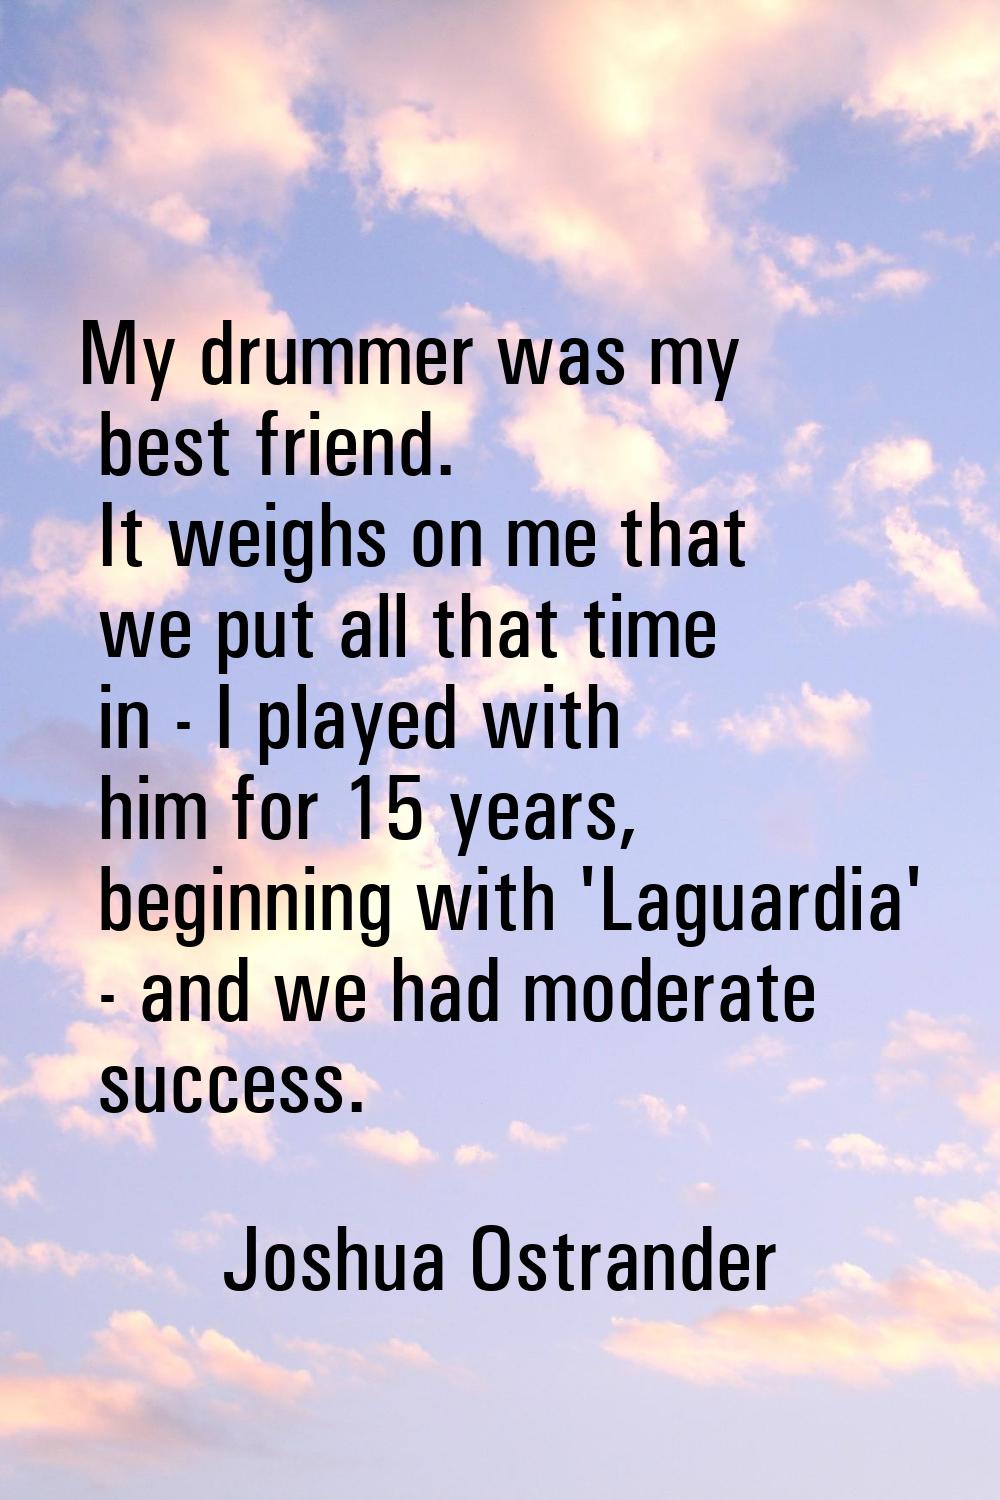 My drummer was my best friend. It weighs on me that we put all that time in - I played with him for